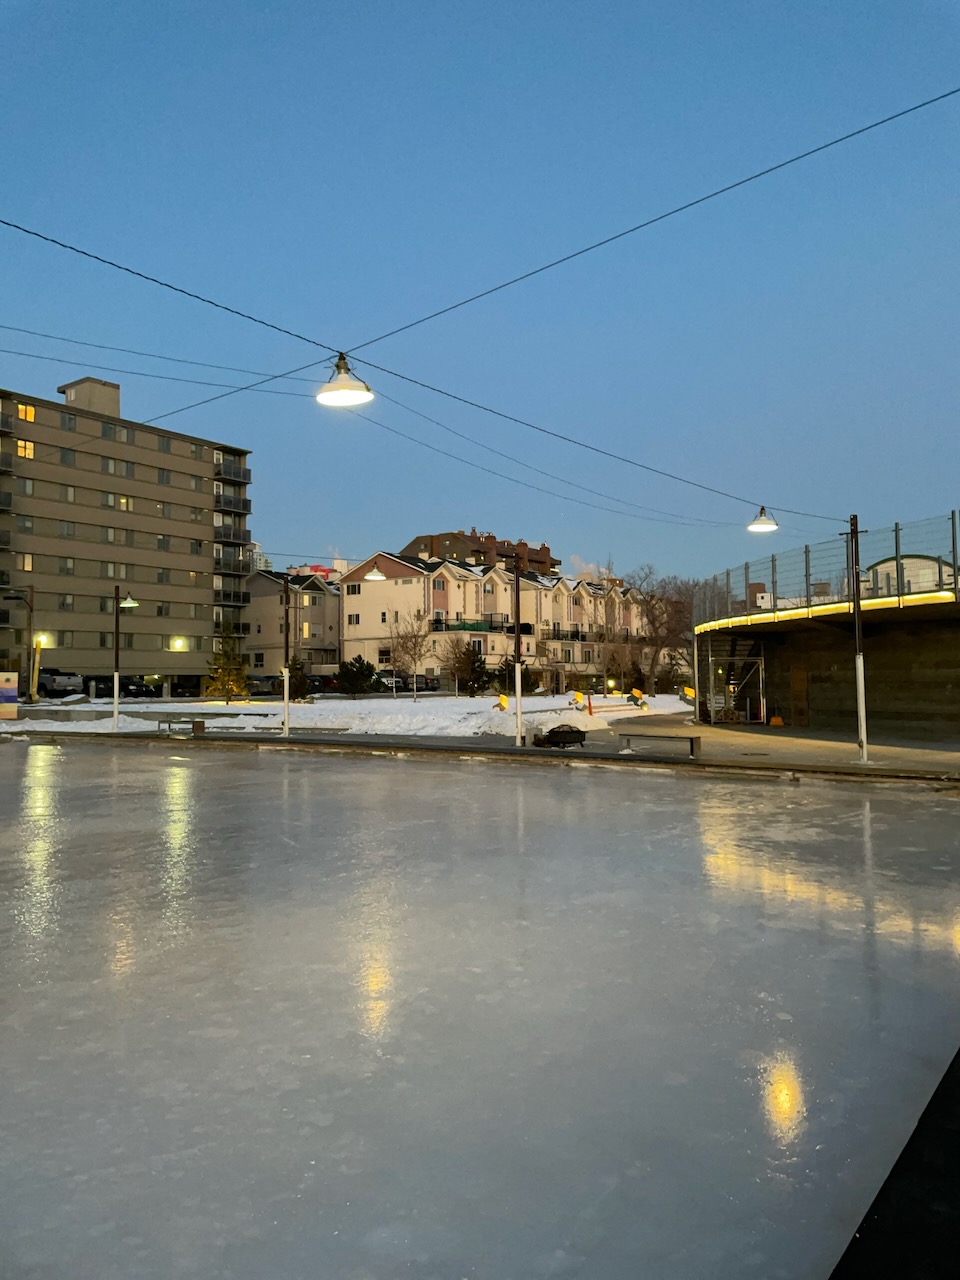 Photo at dusk of an empty outdoor ice rink with overhead industrial-style lights on cables.